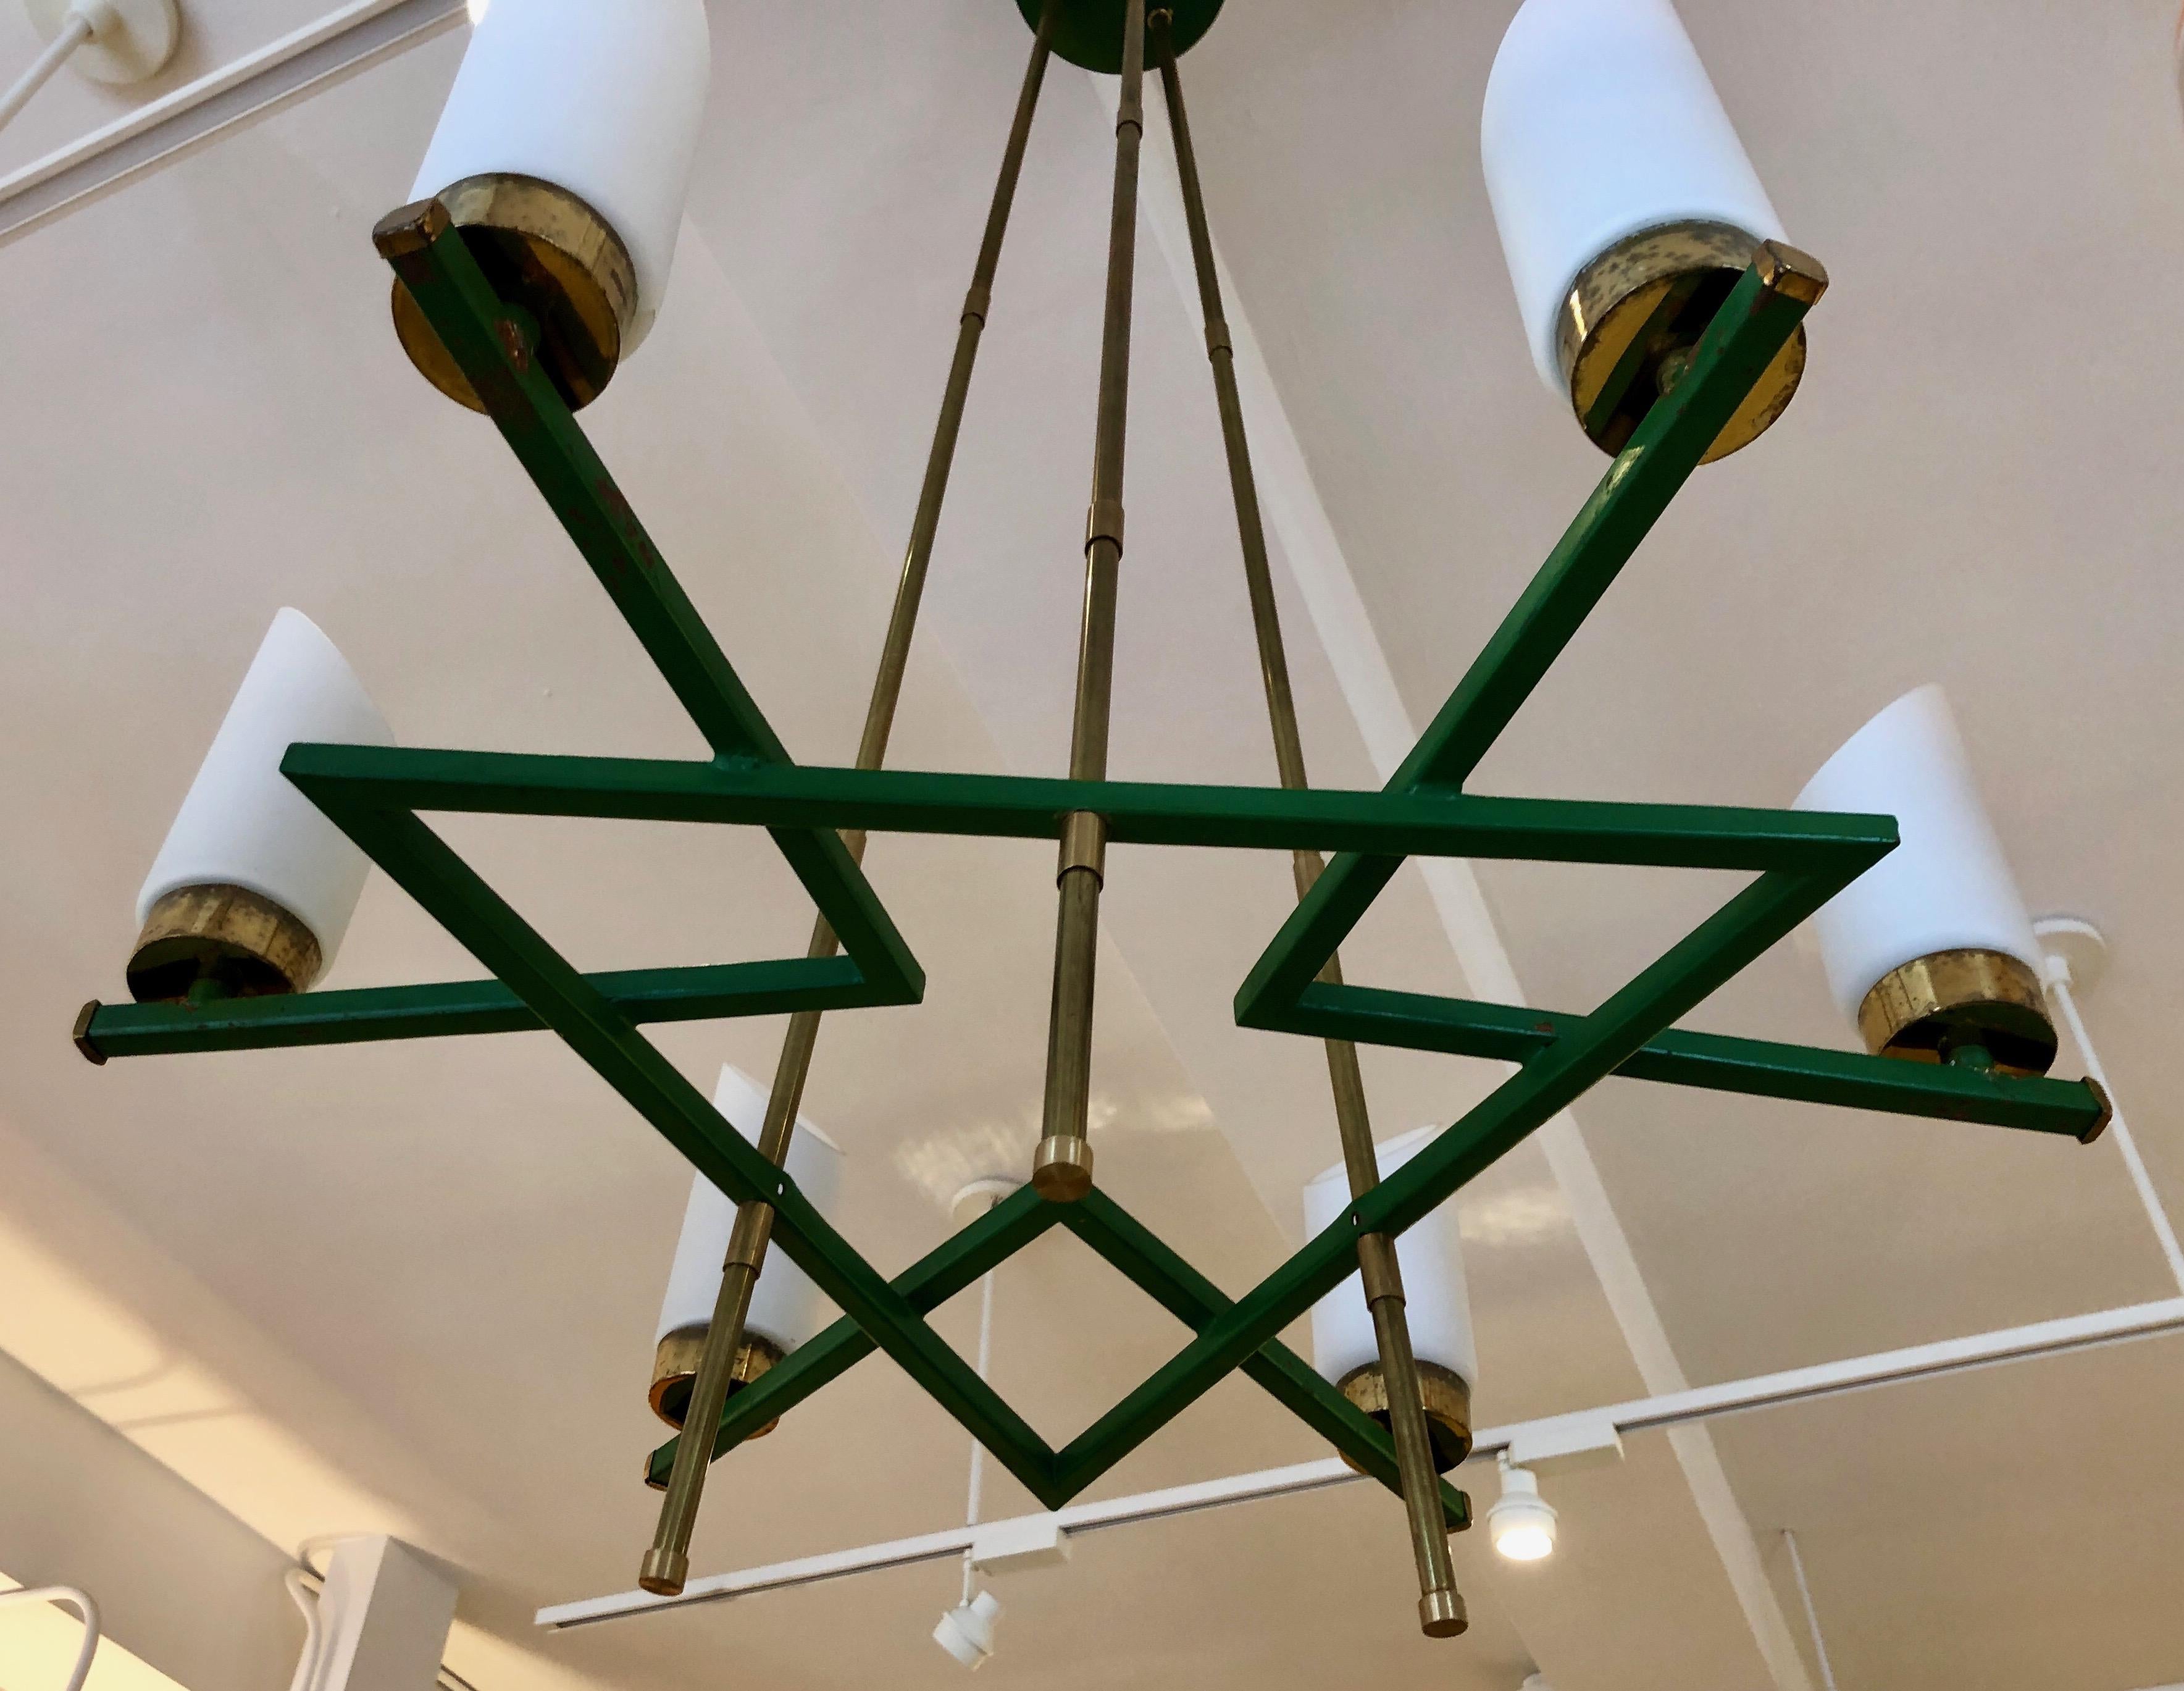 Chic, architectural design in brass, glass and enameled metal. Six upright lights sit on a green metal grid that is suspended by three brass rods.